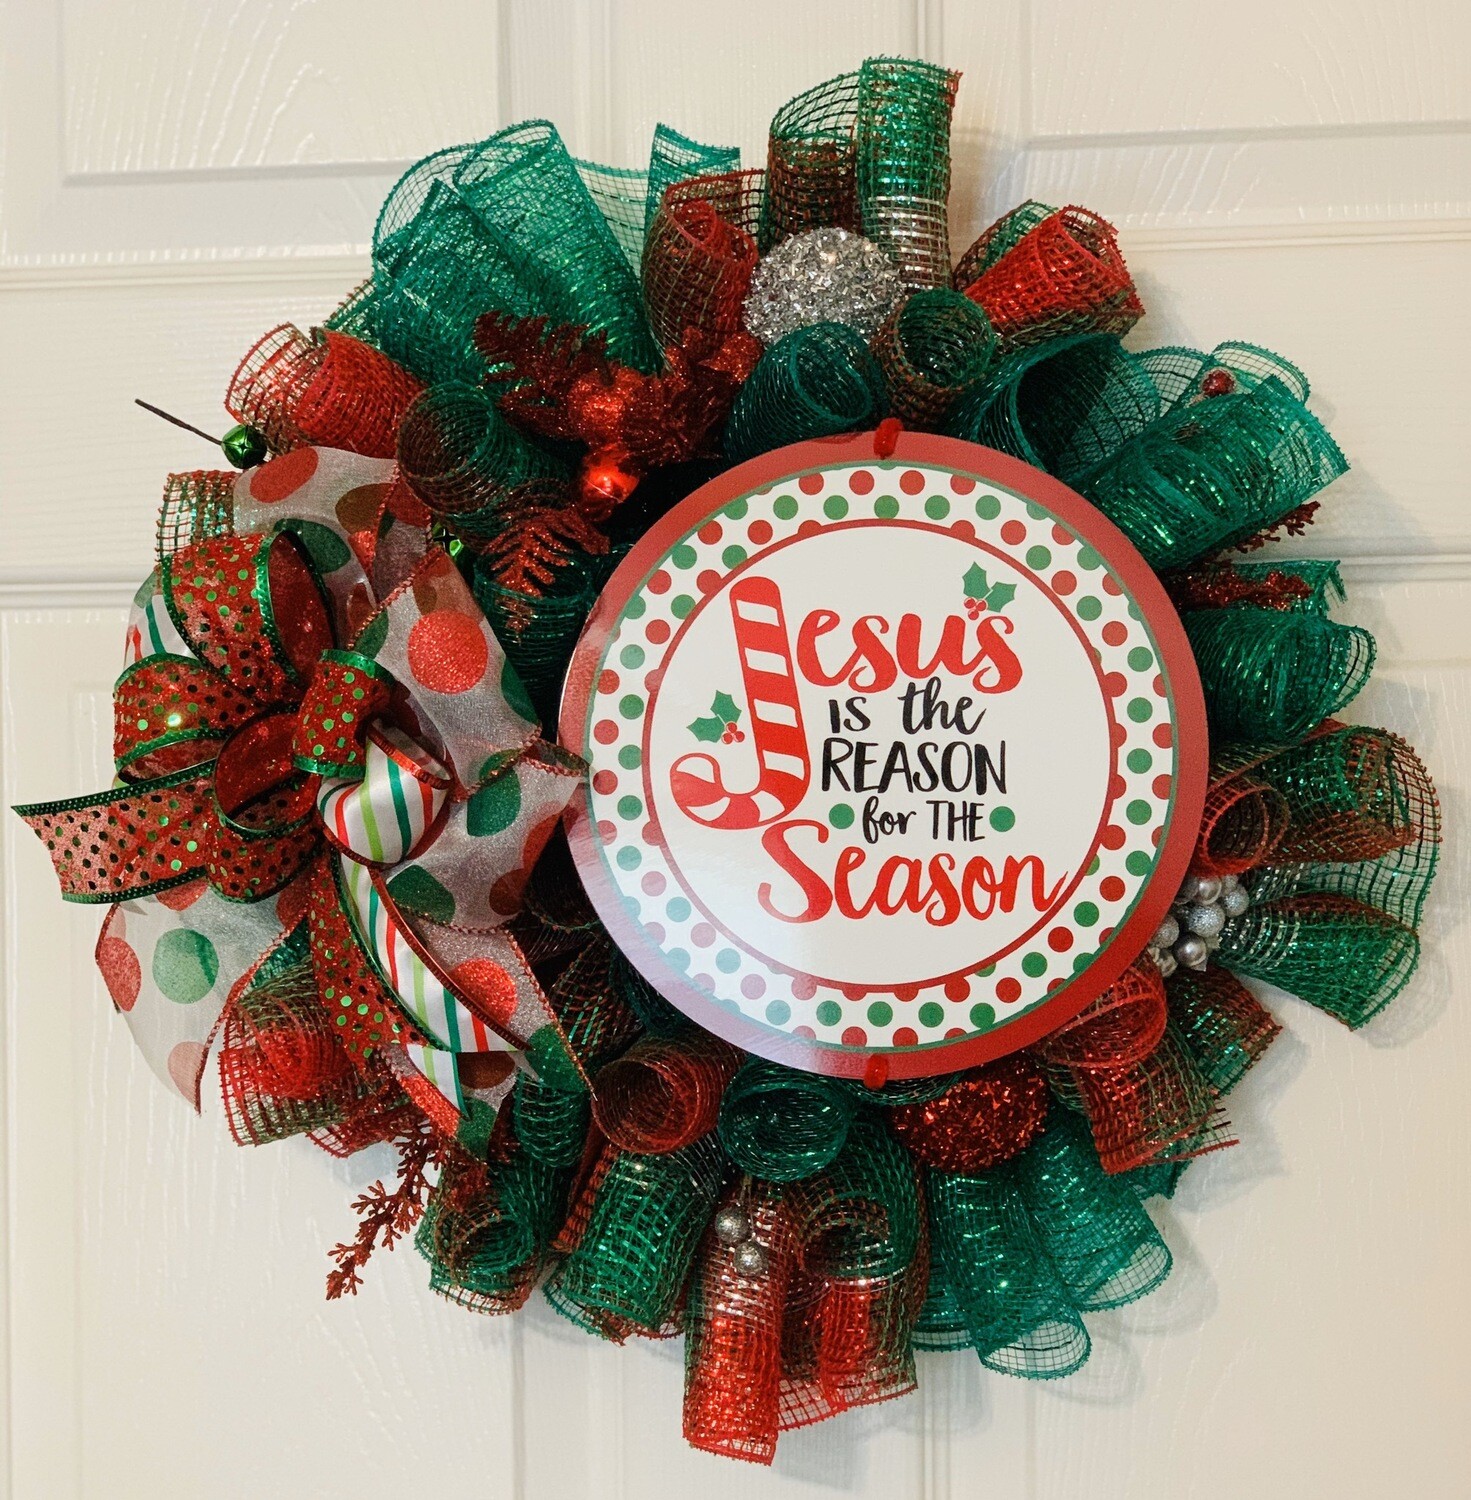 Jesus Is the Reason for the Season, Christmas Pixie Wreath, Red and Green Wreath, A Touch of Faith